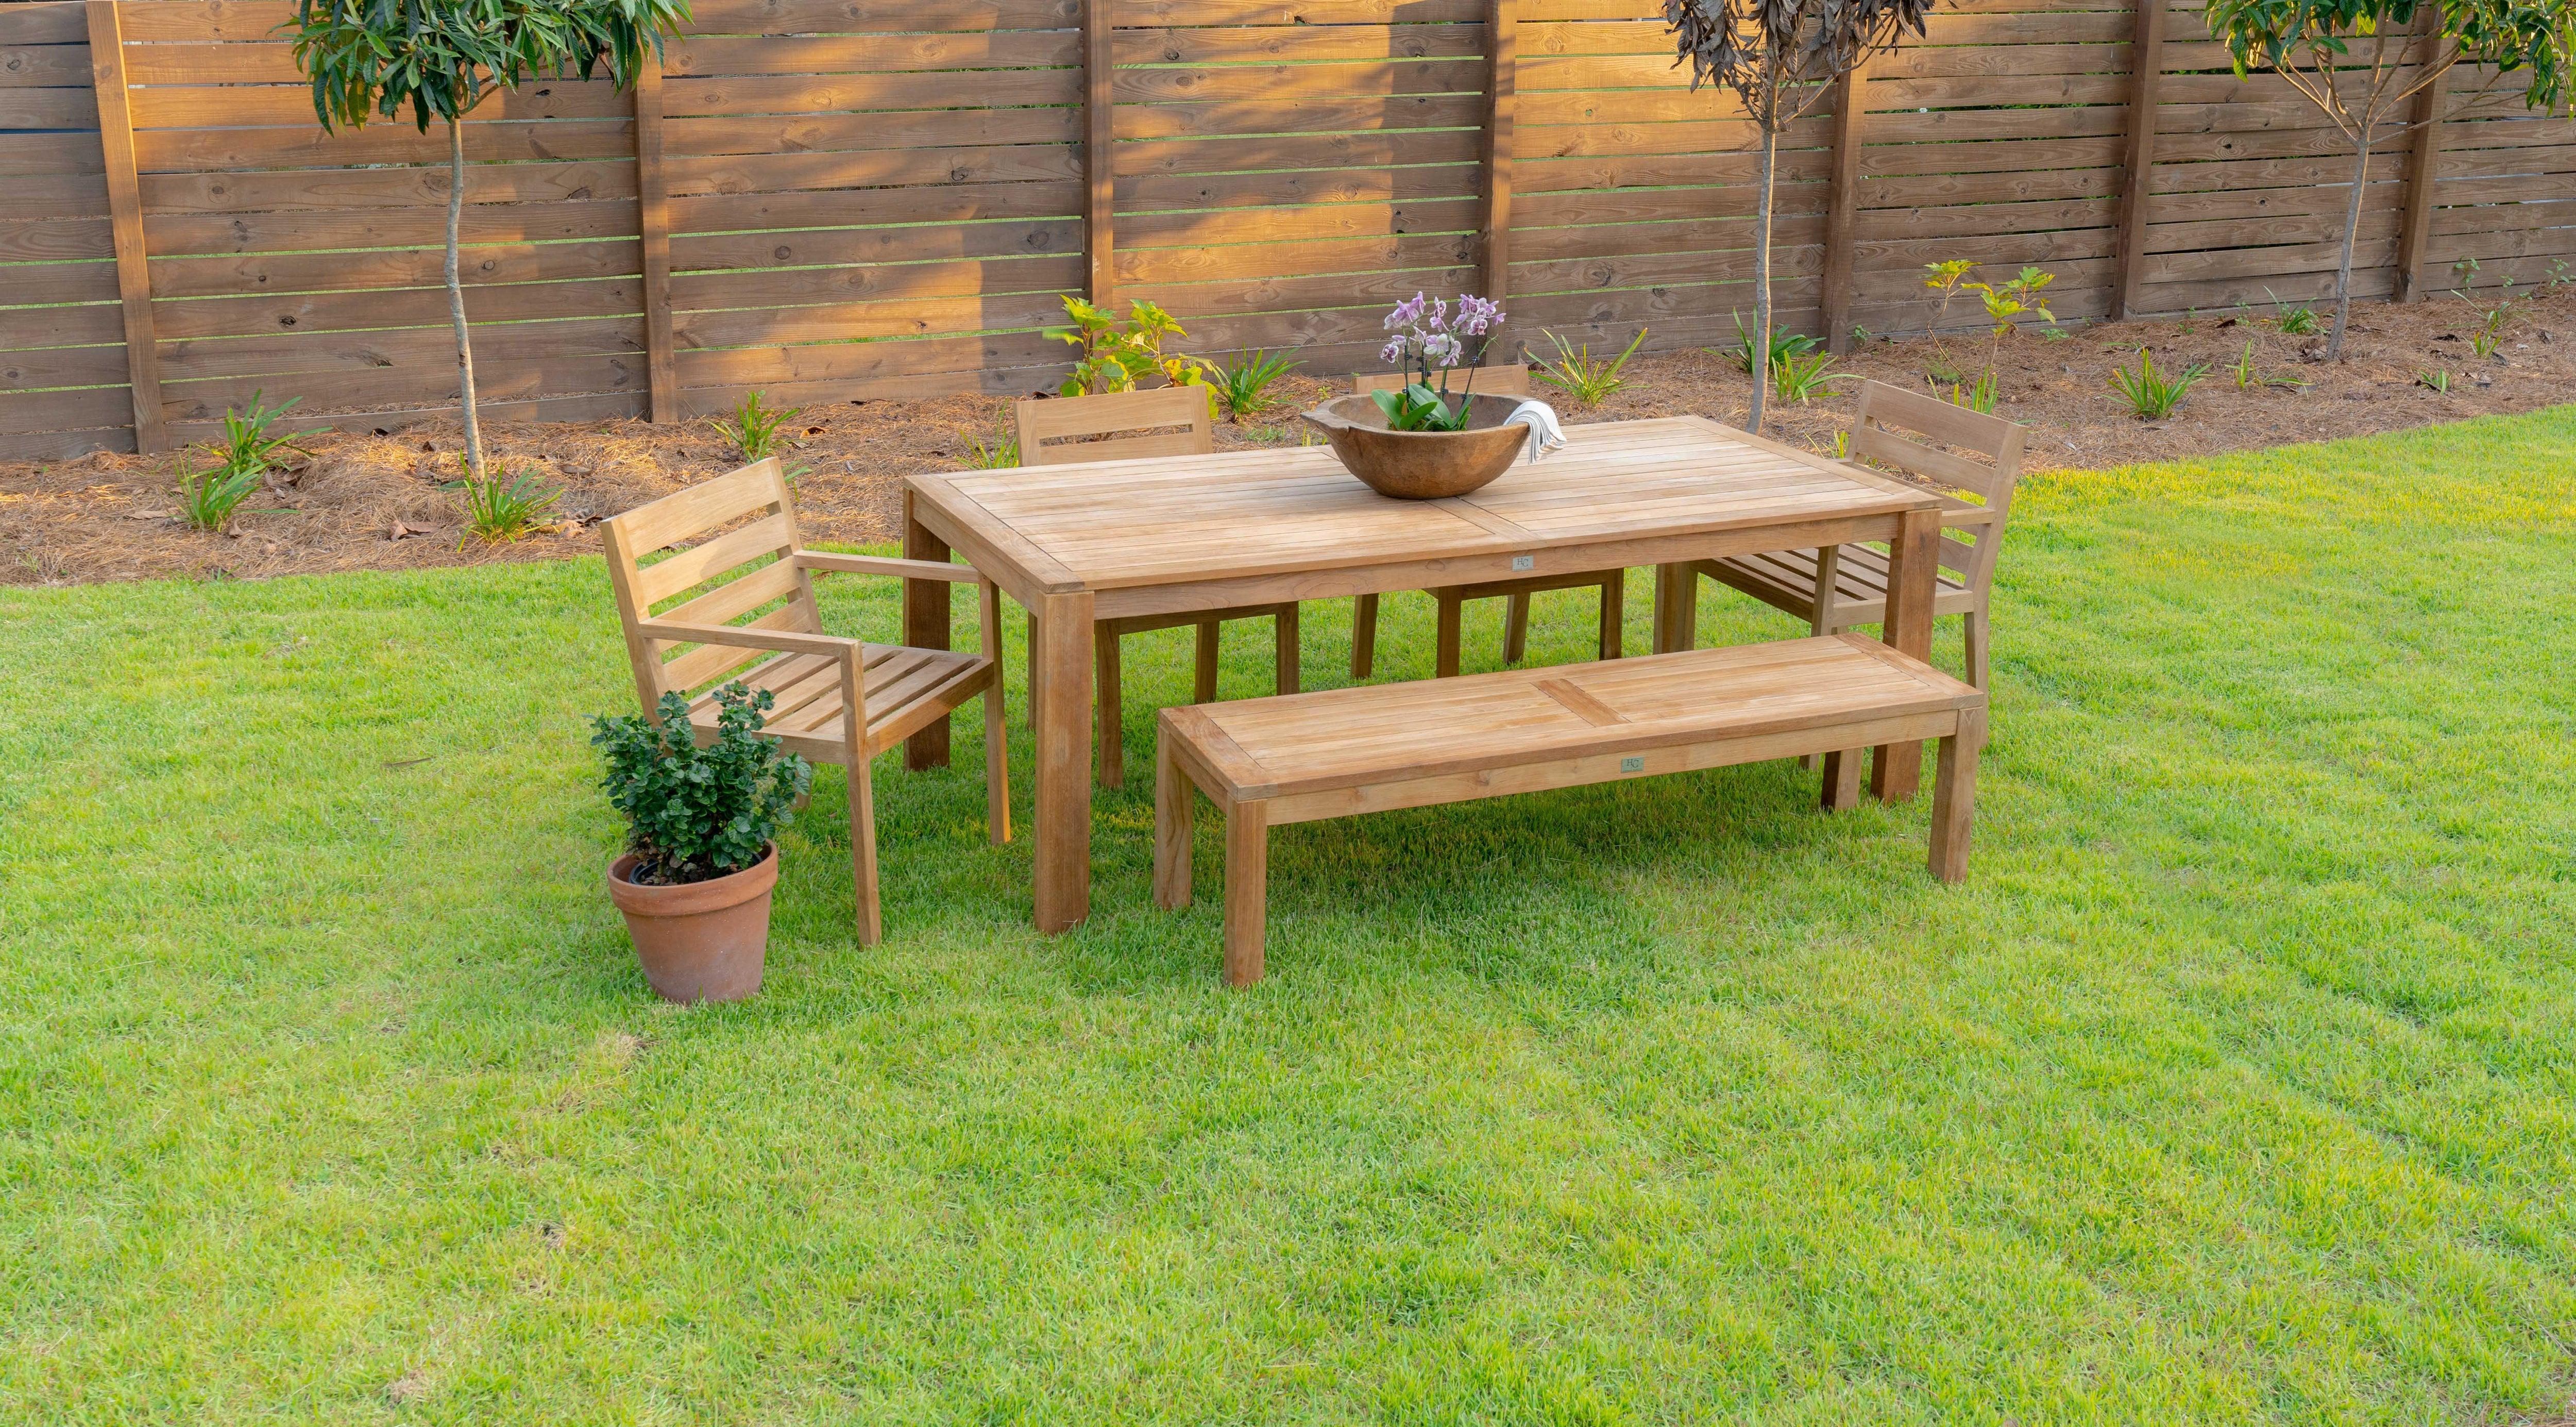 How to Protect Outdoor Wood Furniture: The Ultimate Guide